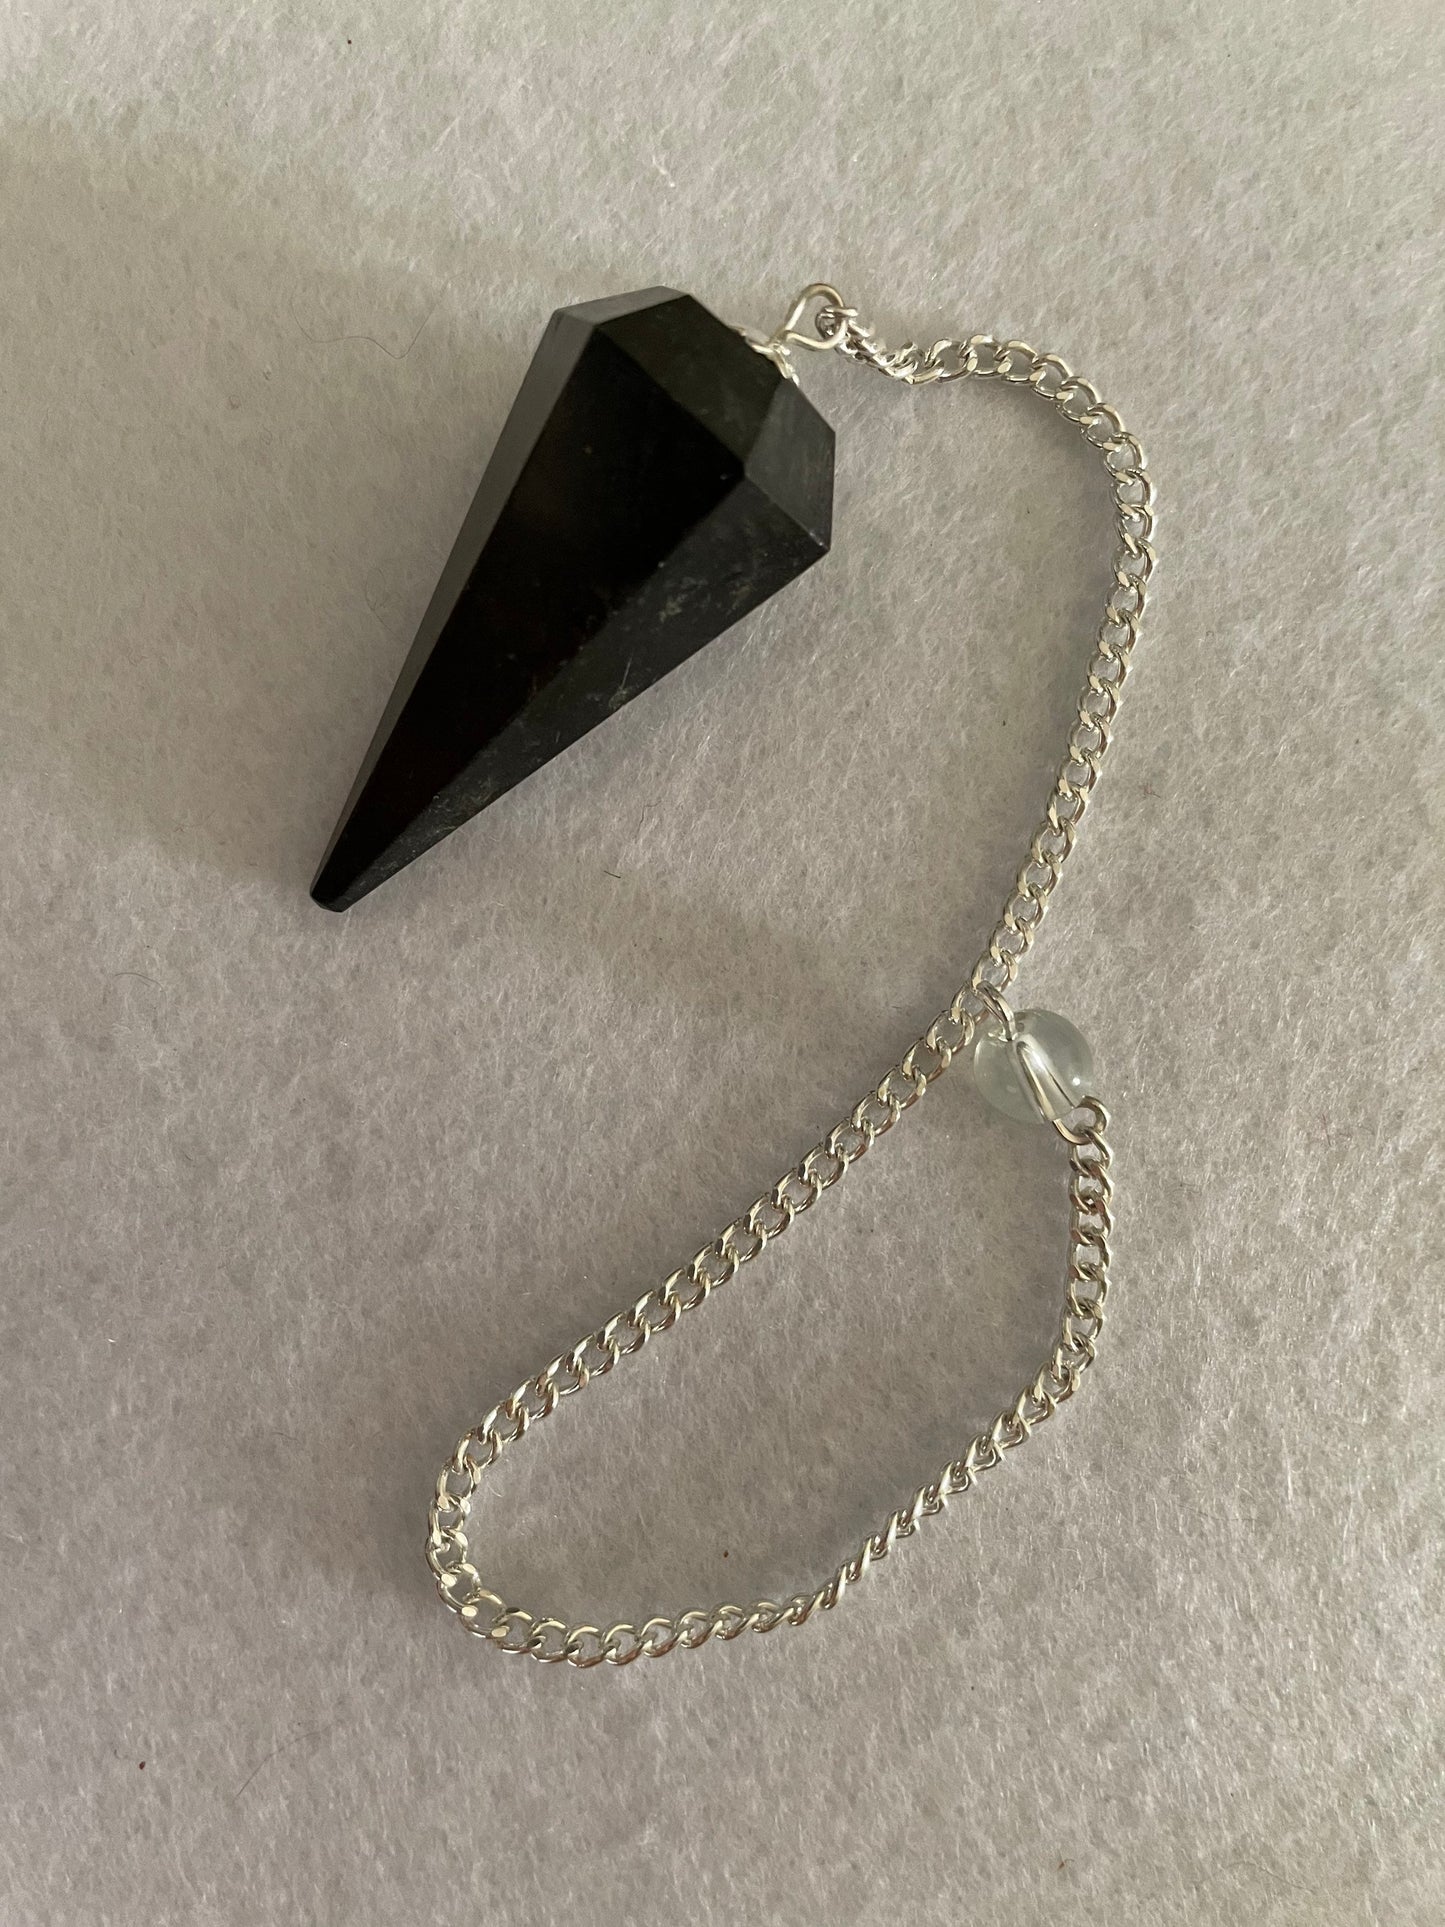 Black Obsidian Pendulum is  1.65” and with chain is 8.5”